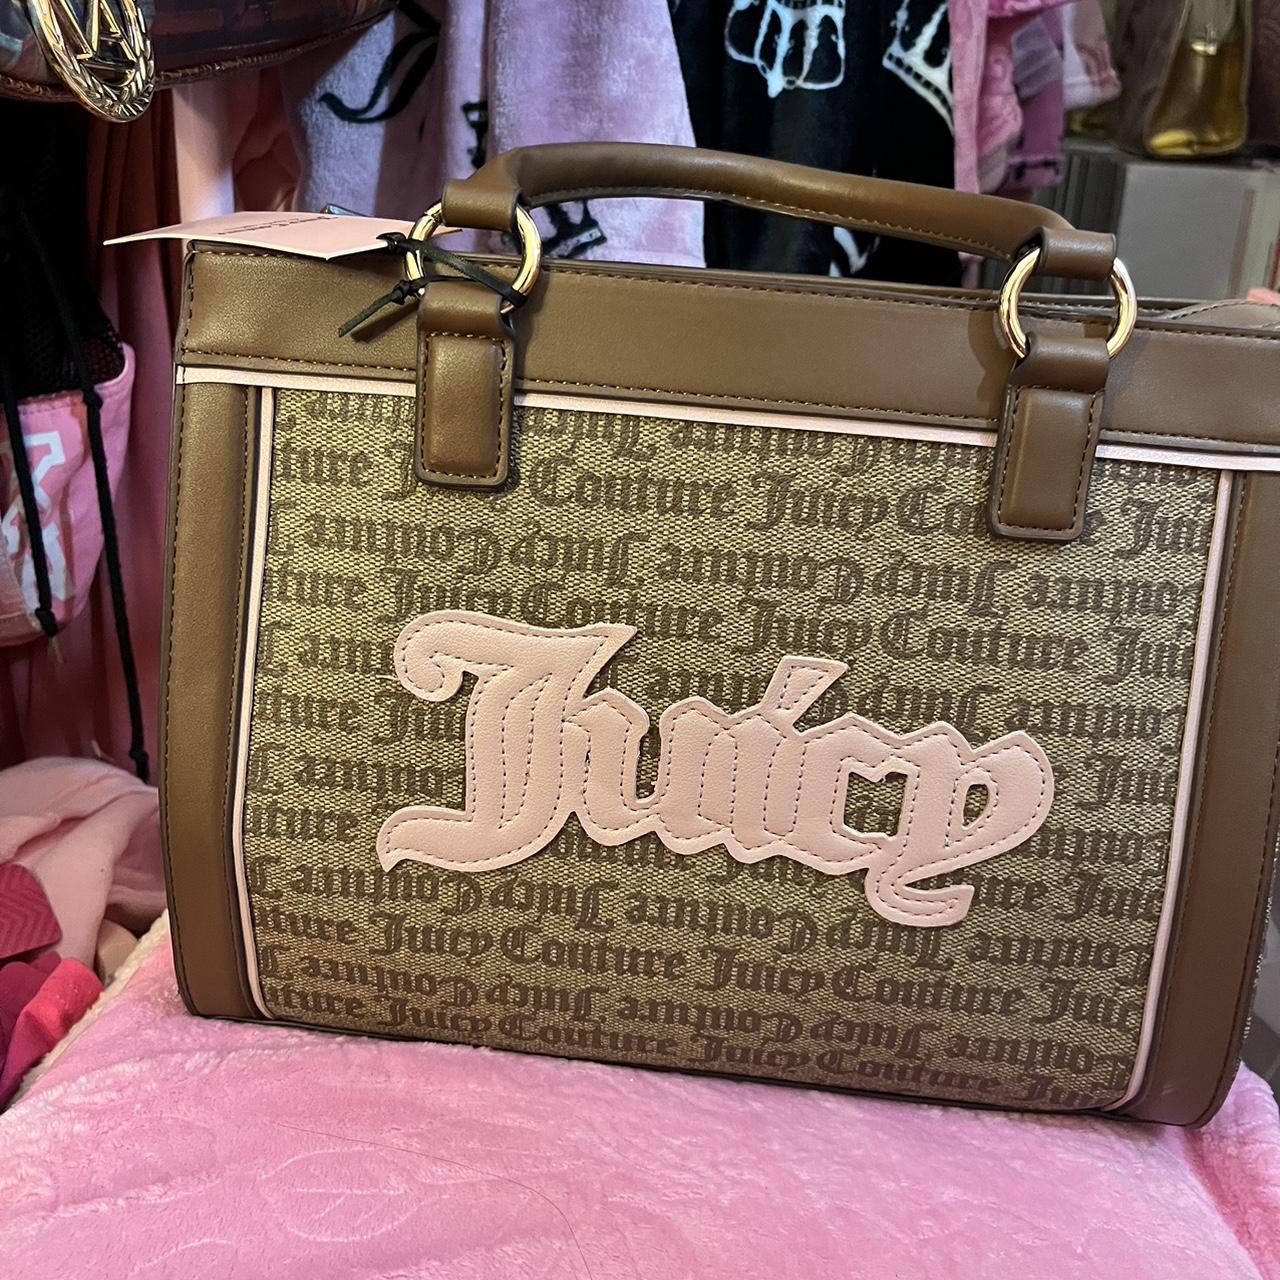 Juicy Couture | Bags | New Juicy Couture Black Purse | Poshmark